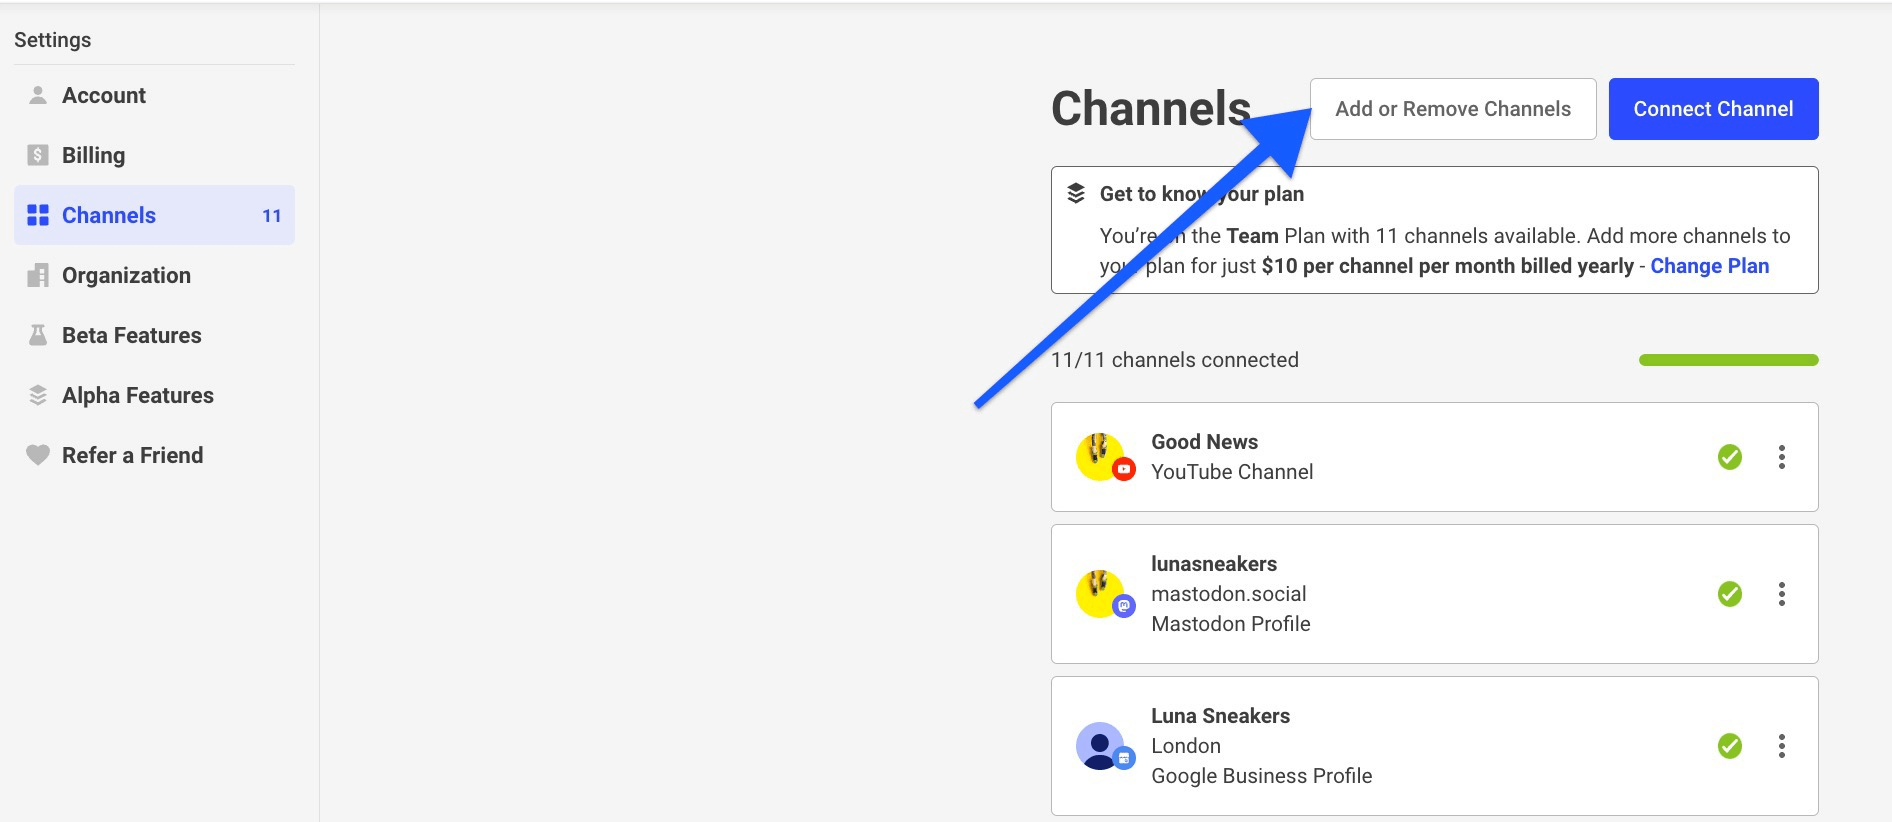 Buffer Channels screen - blue arrow pointing to the Add or Remove Channels button